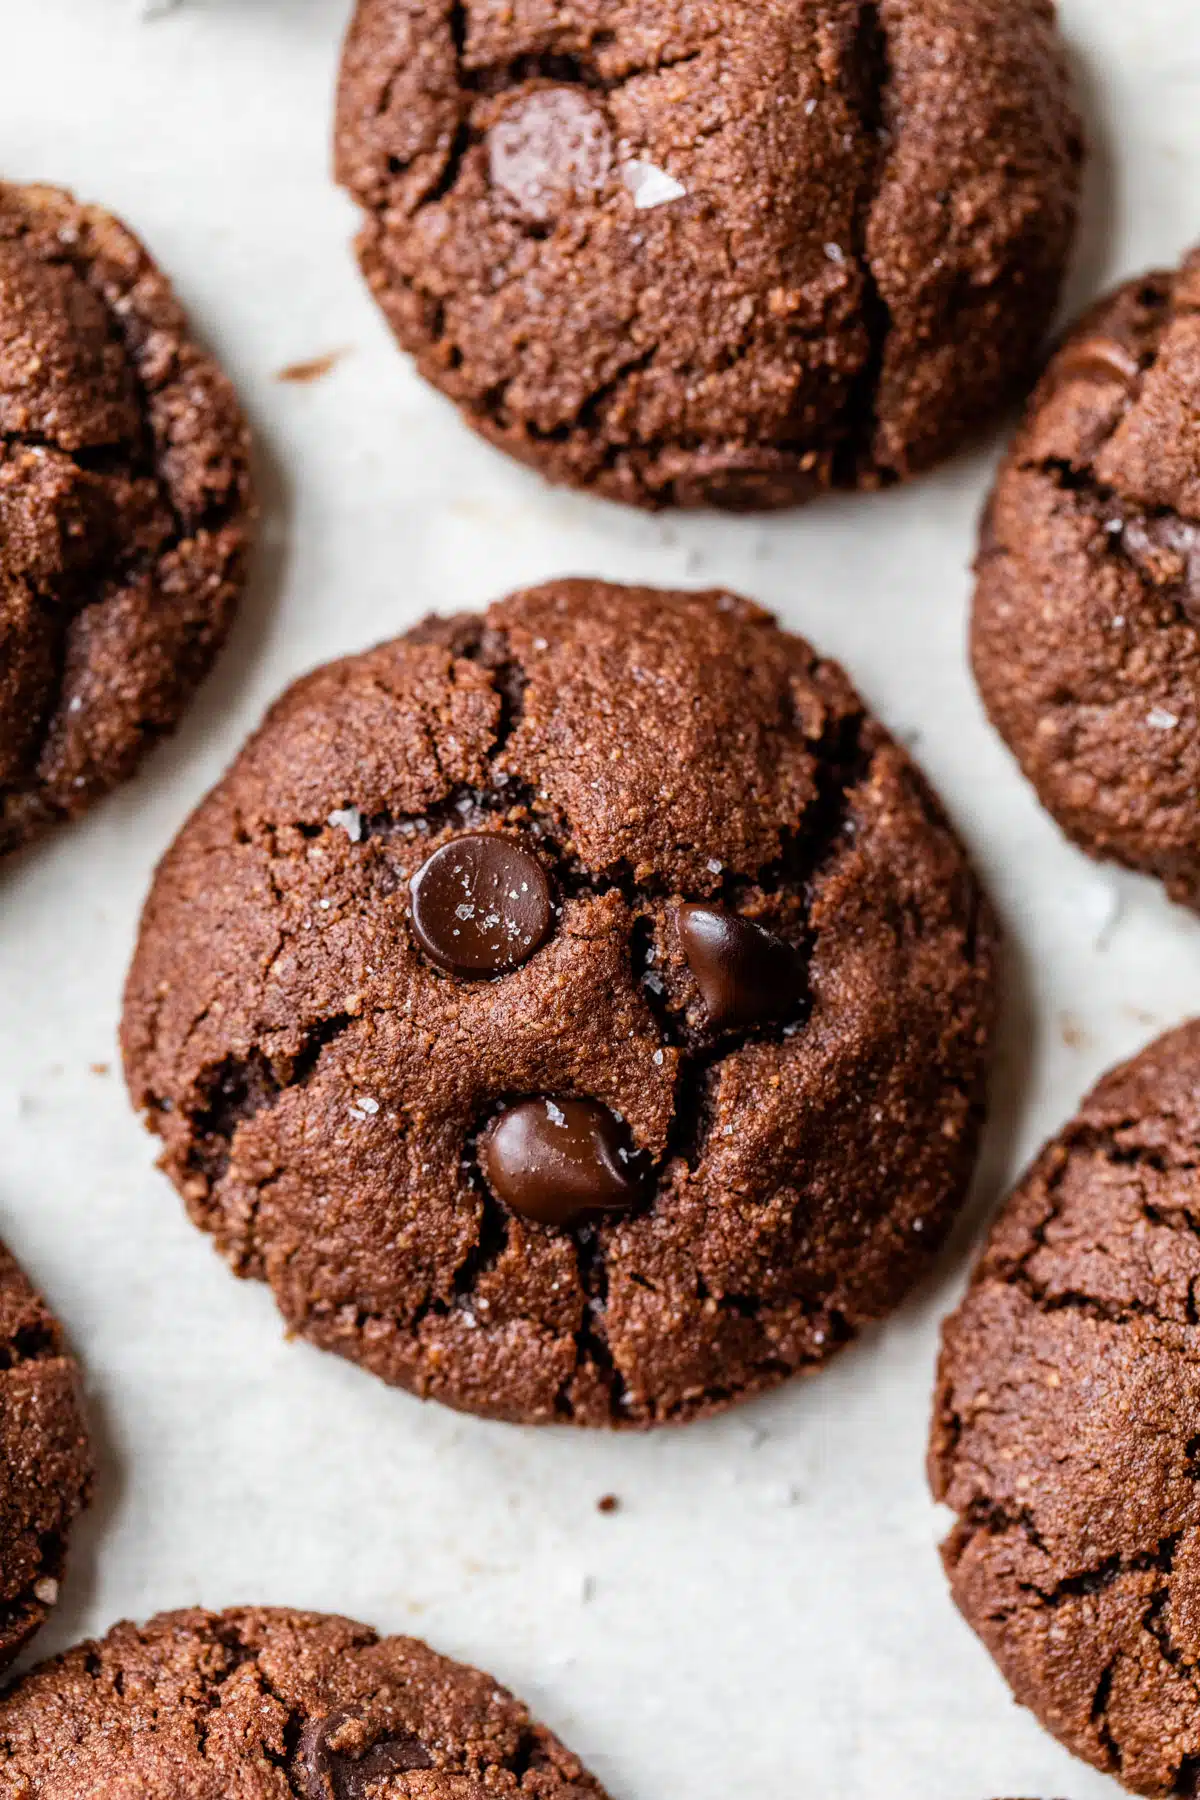 several chocolate cookies with chocolate chips on parchment paper